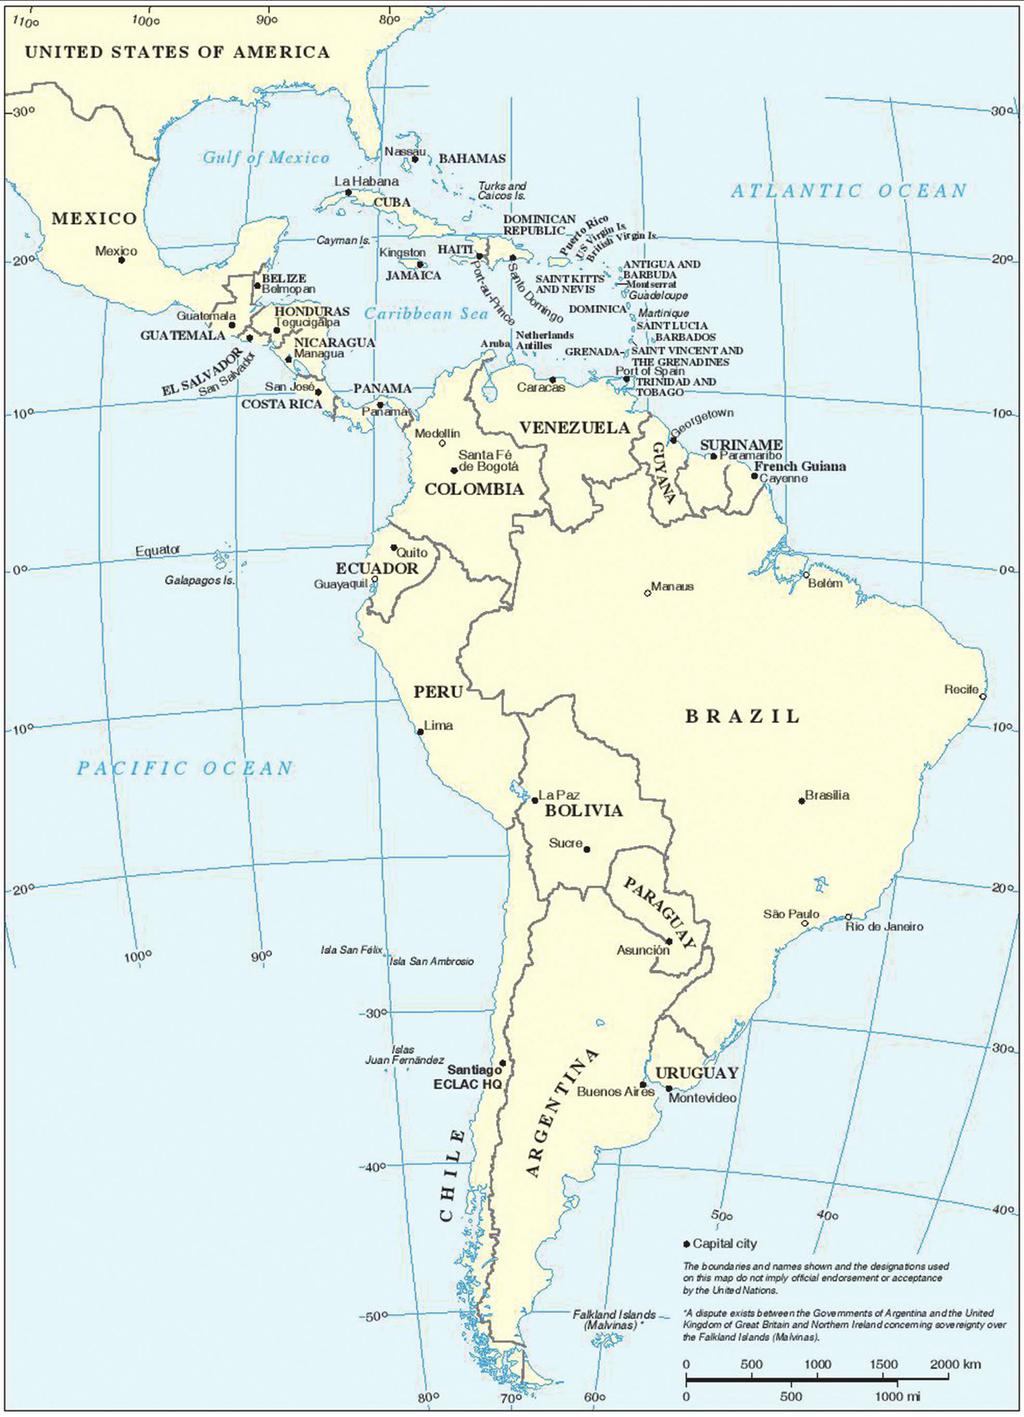 Indian Investments in Latin America and Caribbean: Trends and Prospects Illustrative Map of the Latin America and Caribbean Region Source: United Nations, Geospatial Information Section Note: Map not